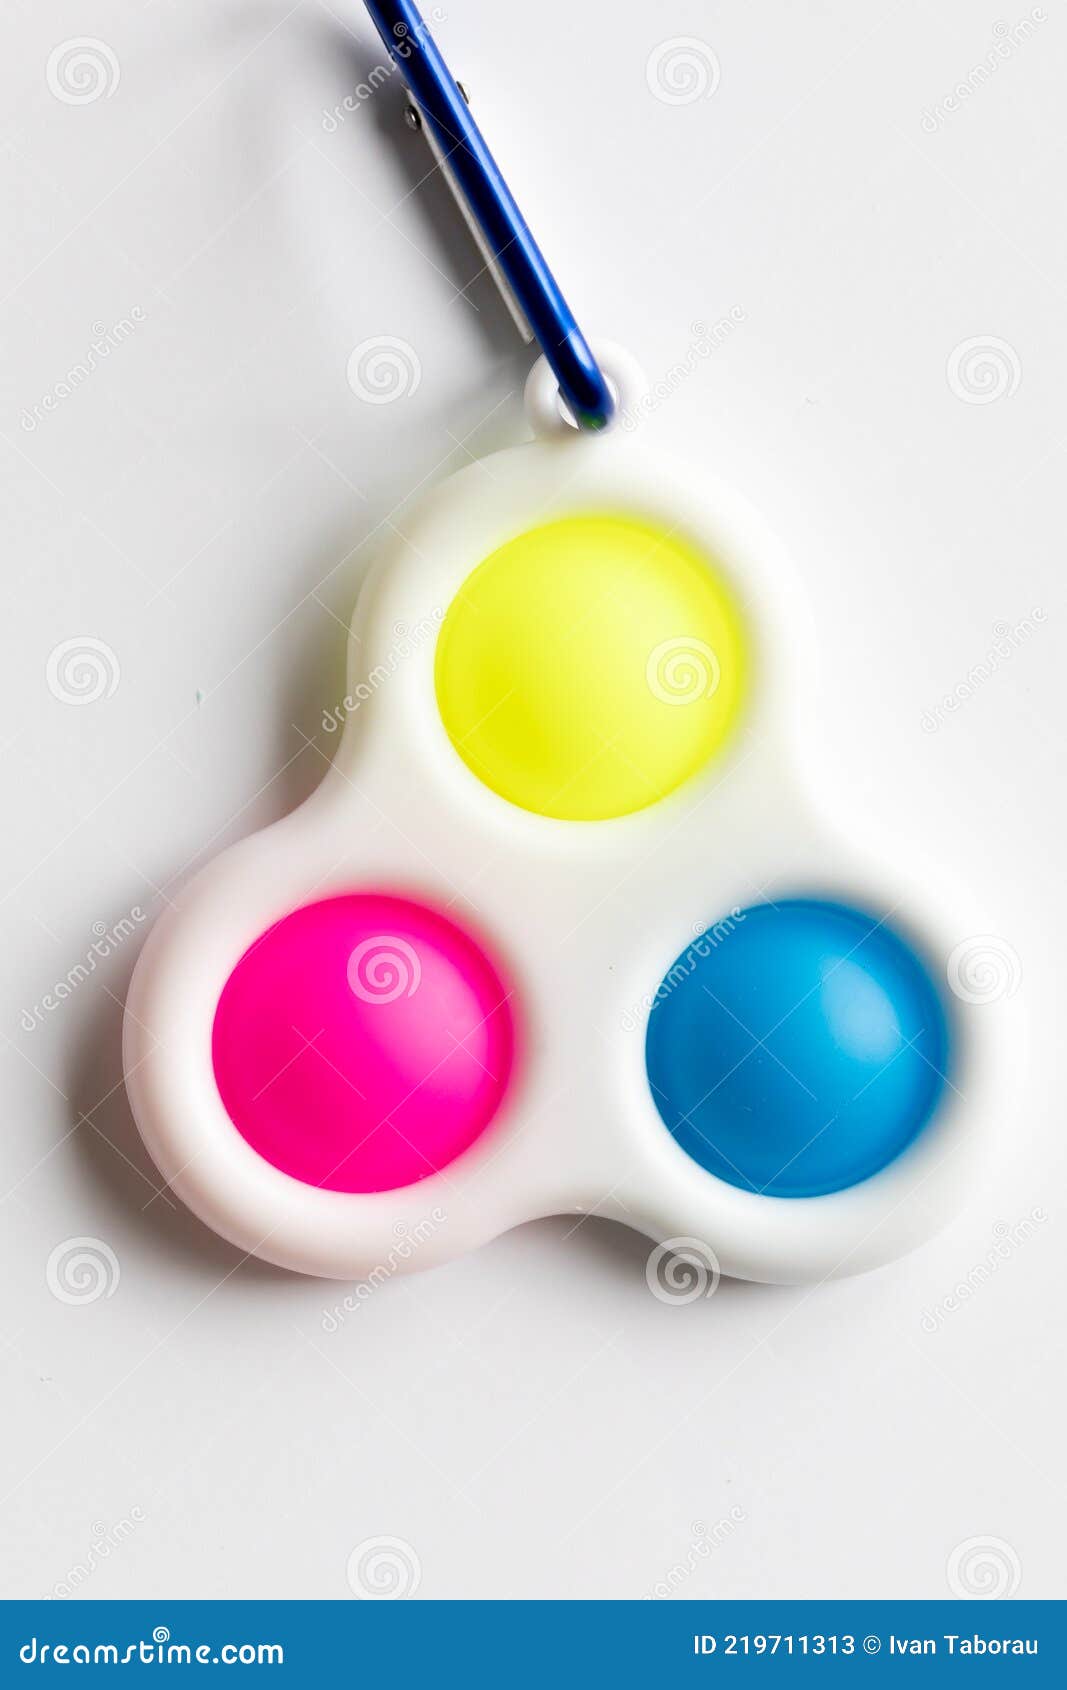 Simple Dimple Fidget Toy, Colorful Anti-stress Game Isolated on White  Background Stock Image - Image of autism, calming: 219711313